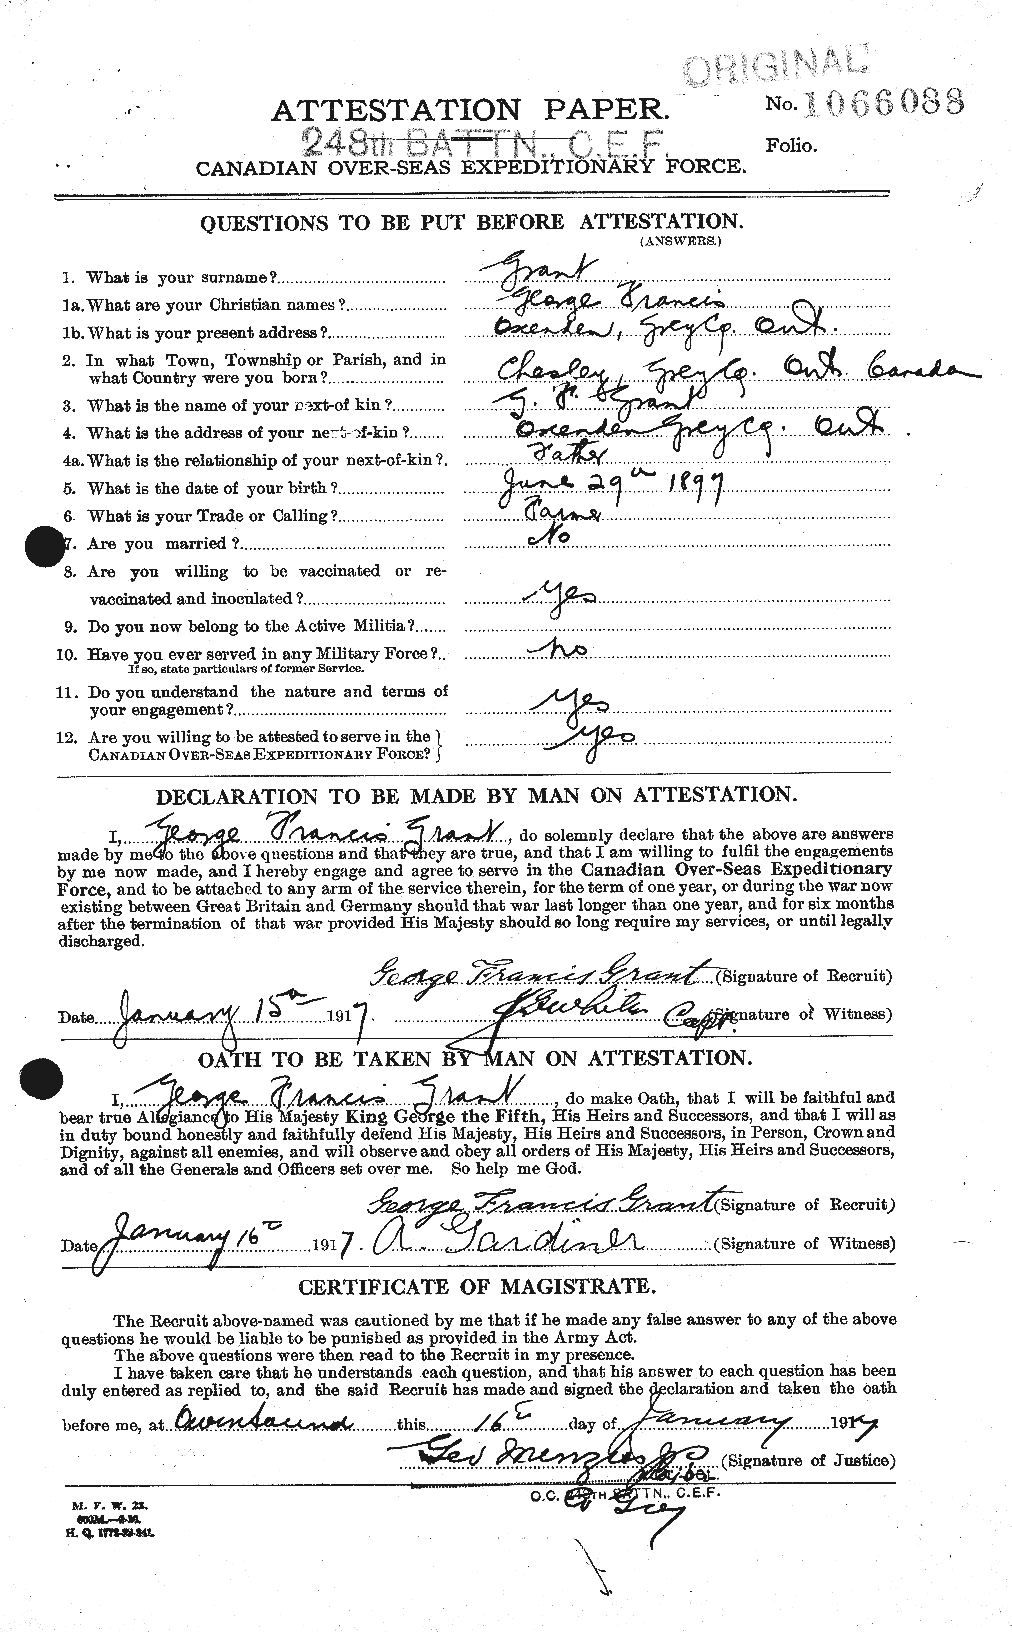 Personnel Records of the First World War - CEF 362545a